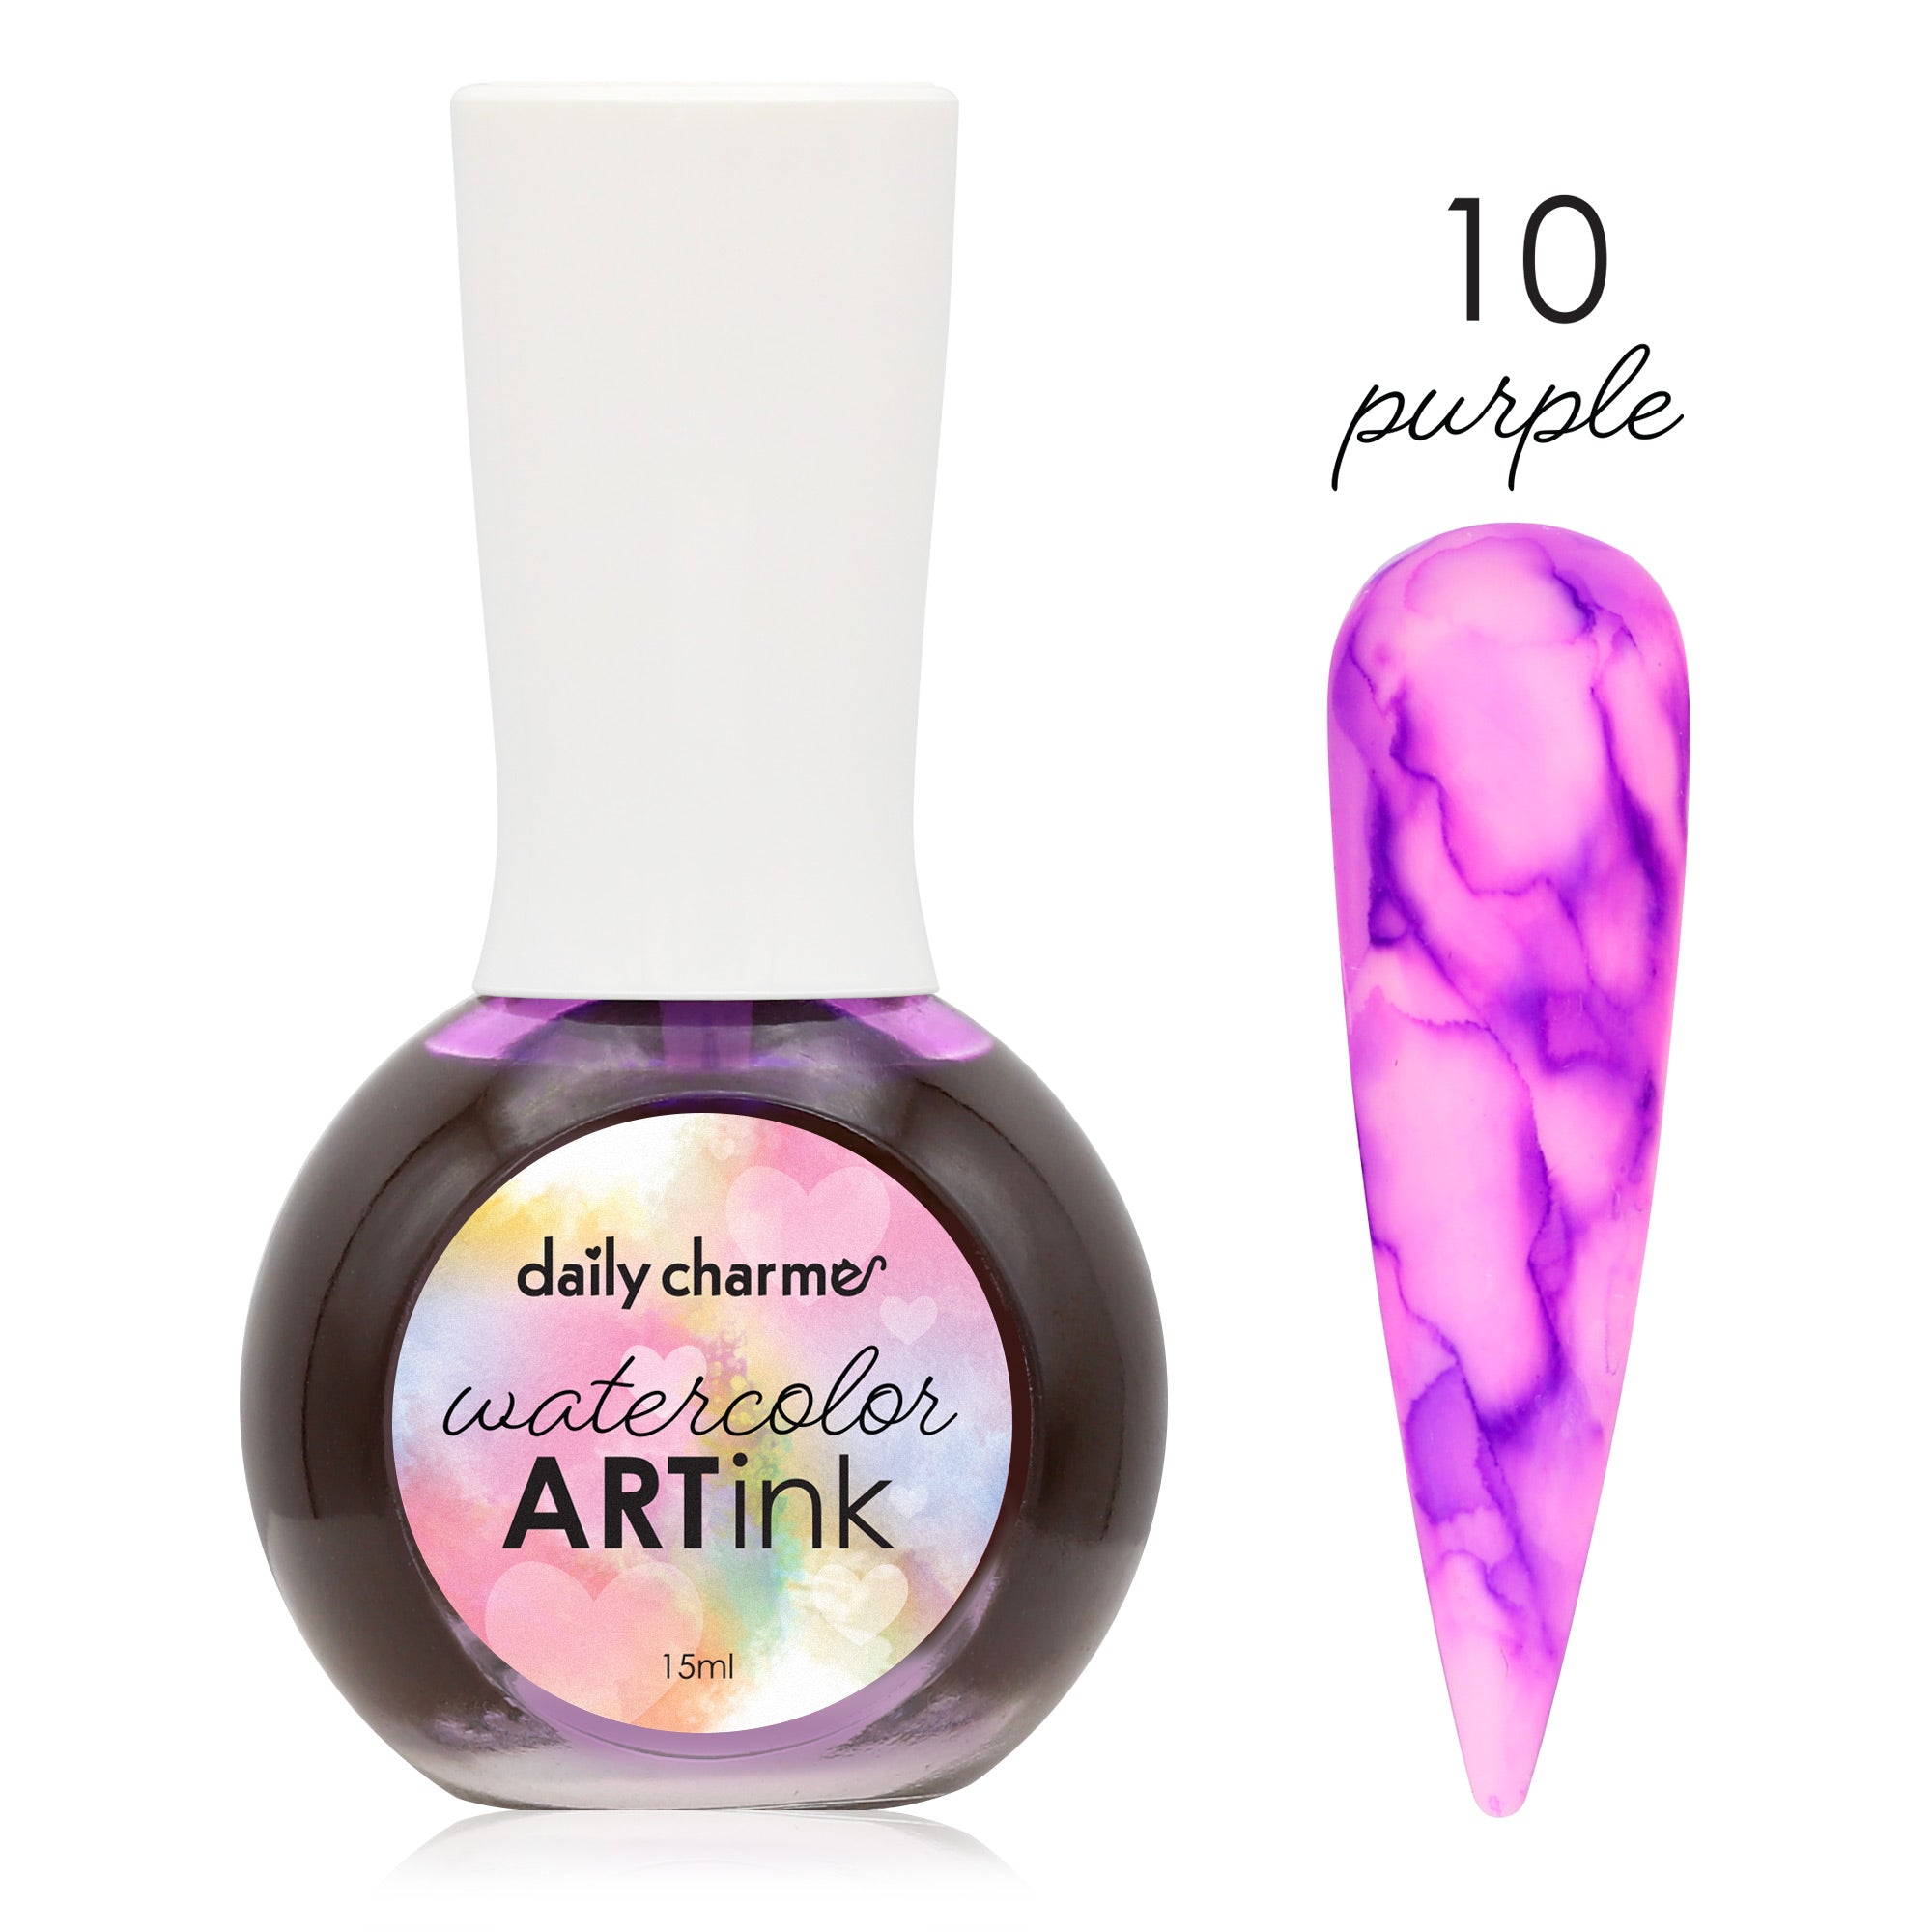 Daily Charme Watercolor Art Ink / 10 Purple Amethyst Marble Nail Design Easy